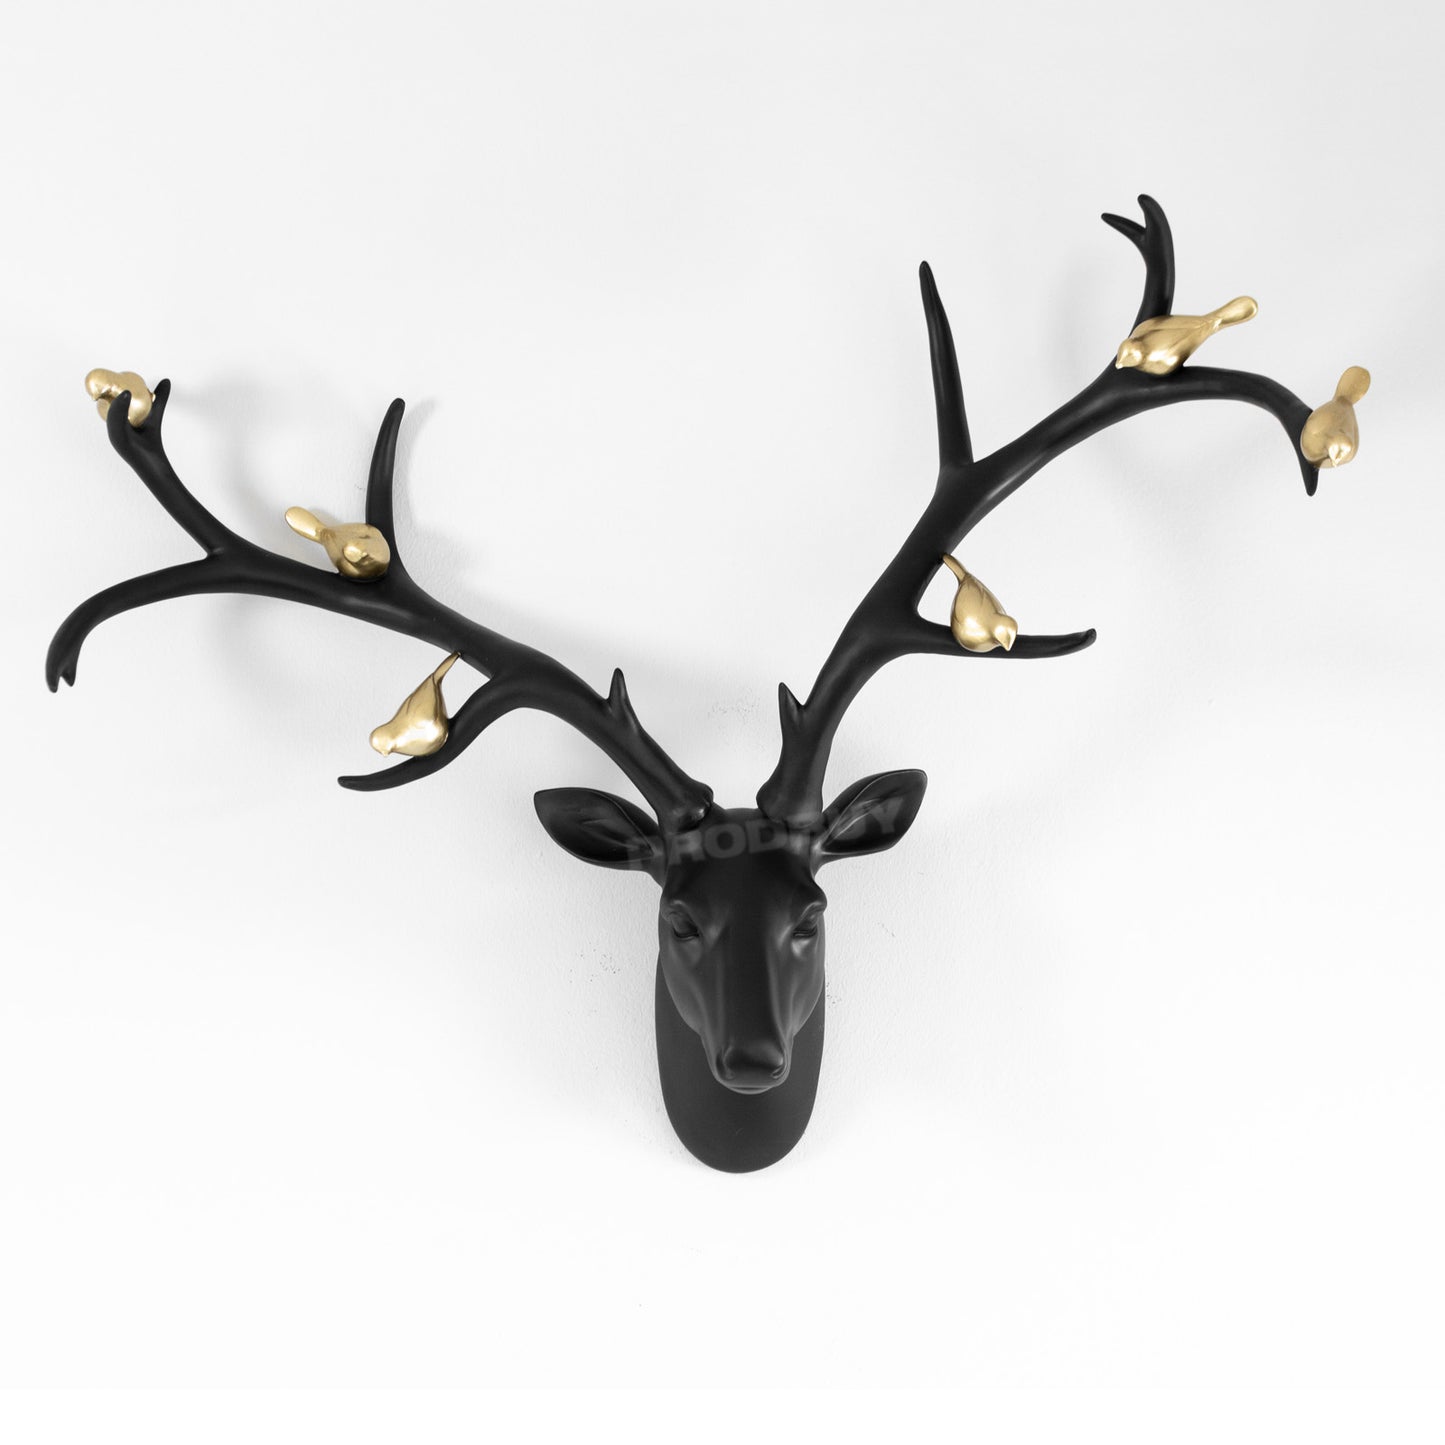 Black Stag Head Wall Decoration with Gold Birds on Antlers